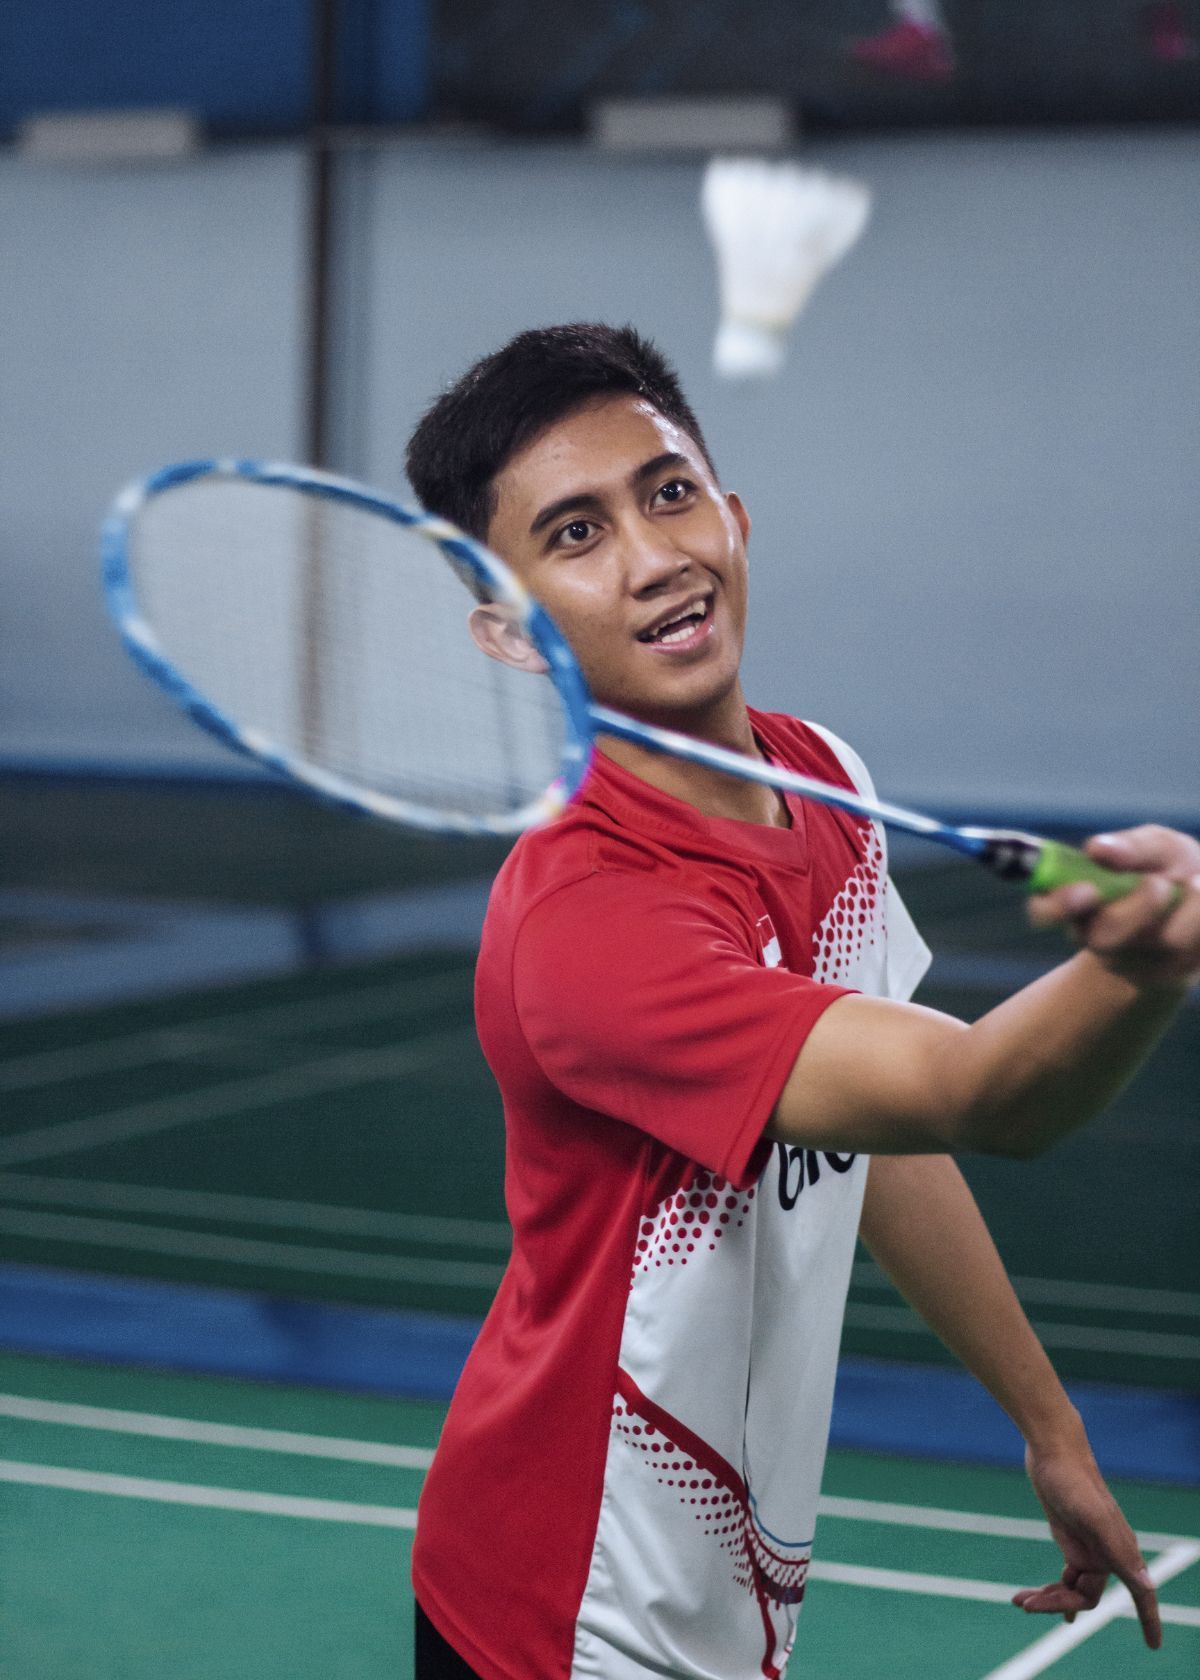 How to Get Better at Badminton: Essential Tips